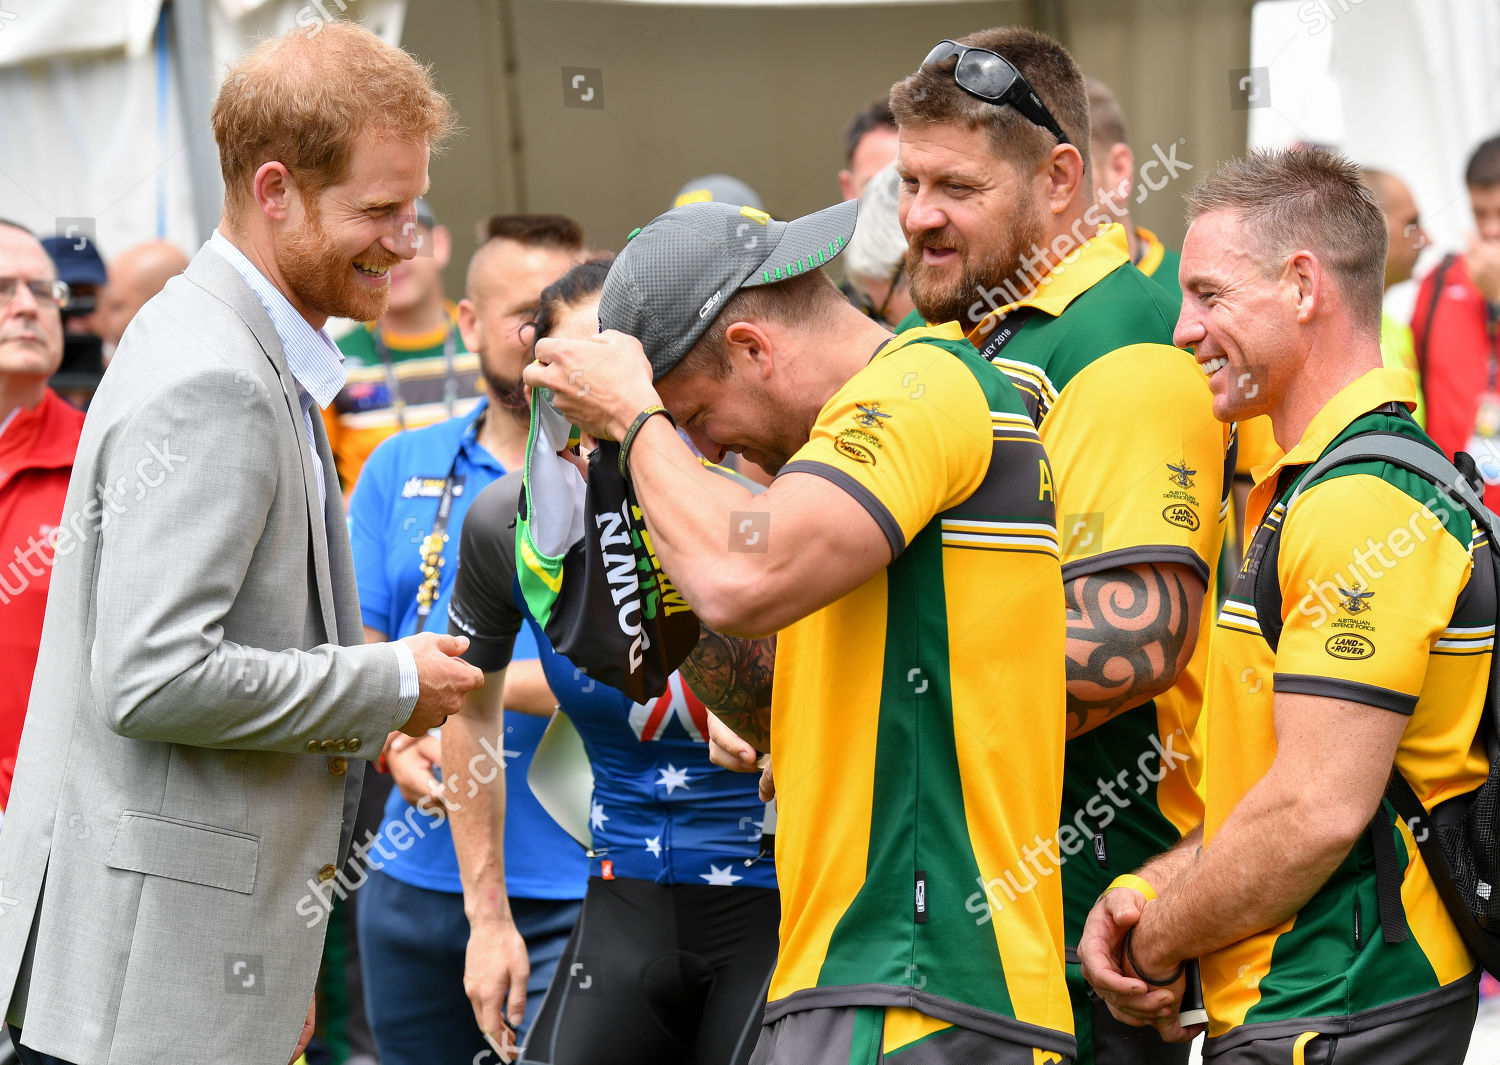 prince-harry-and-meghan-duchess-of-sussex-tour-of-australia-shutterstock-editorial-9939300ad.jpg